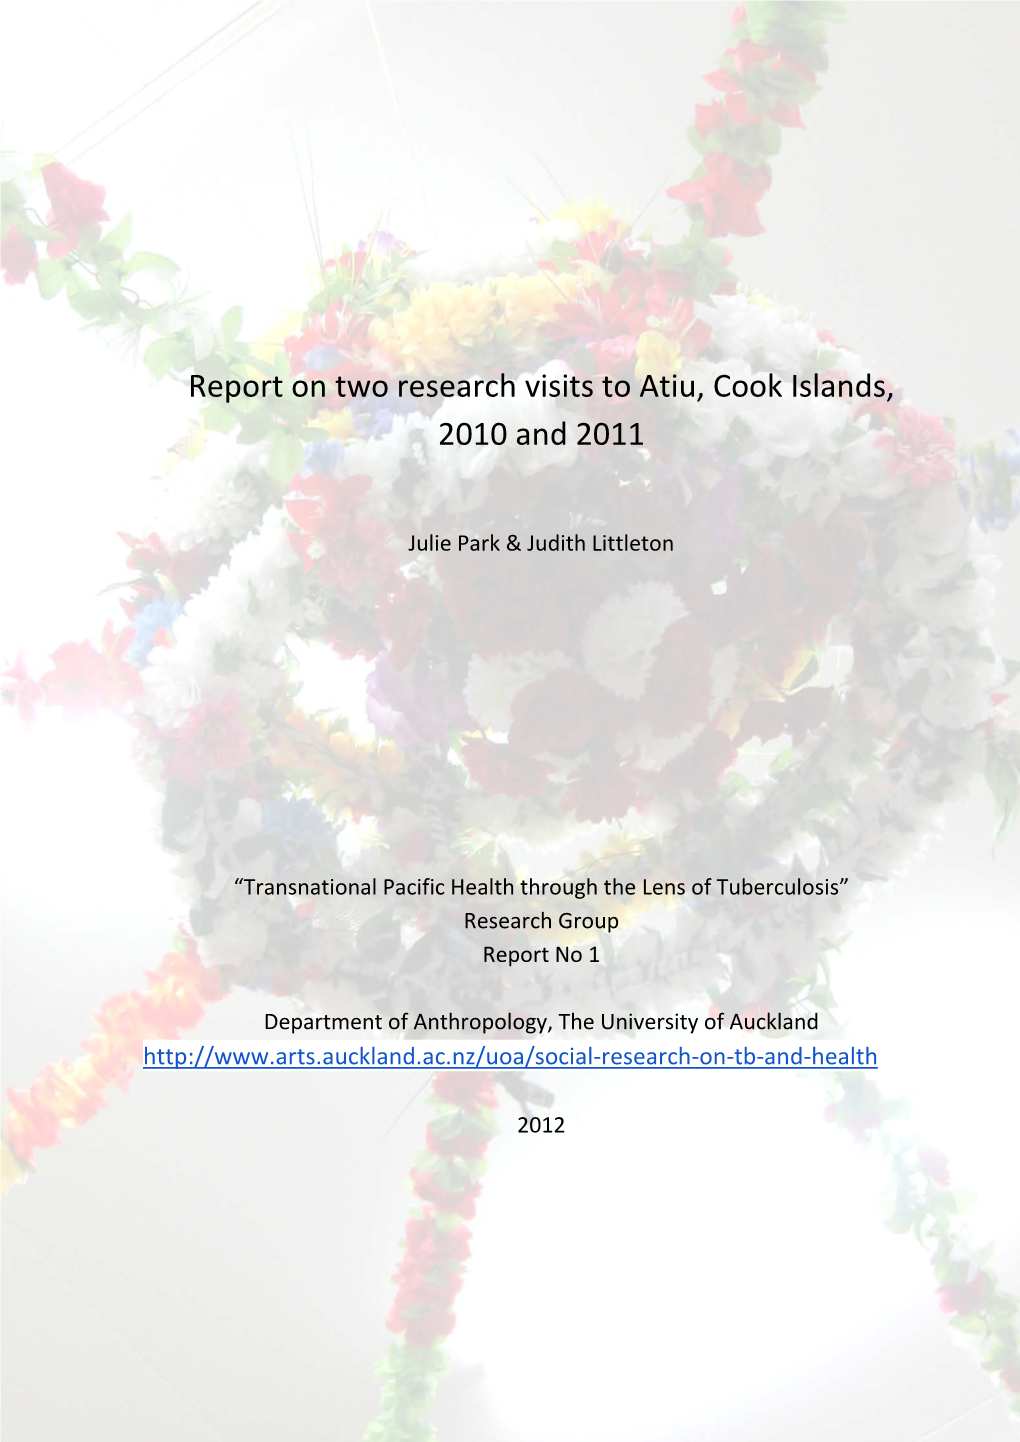 Report on Two Research Visits to Atiu, Cook Islands, 2010 and 2011